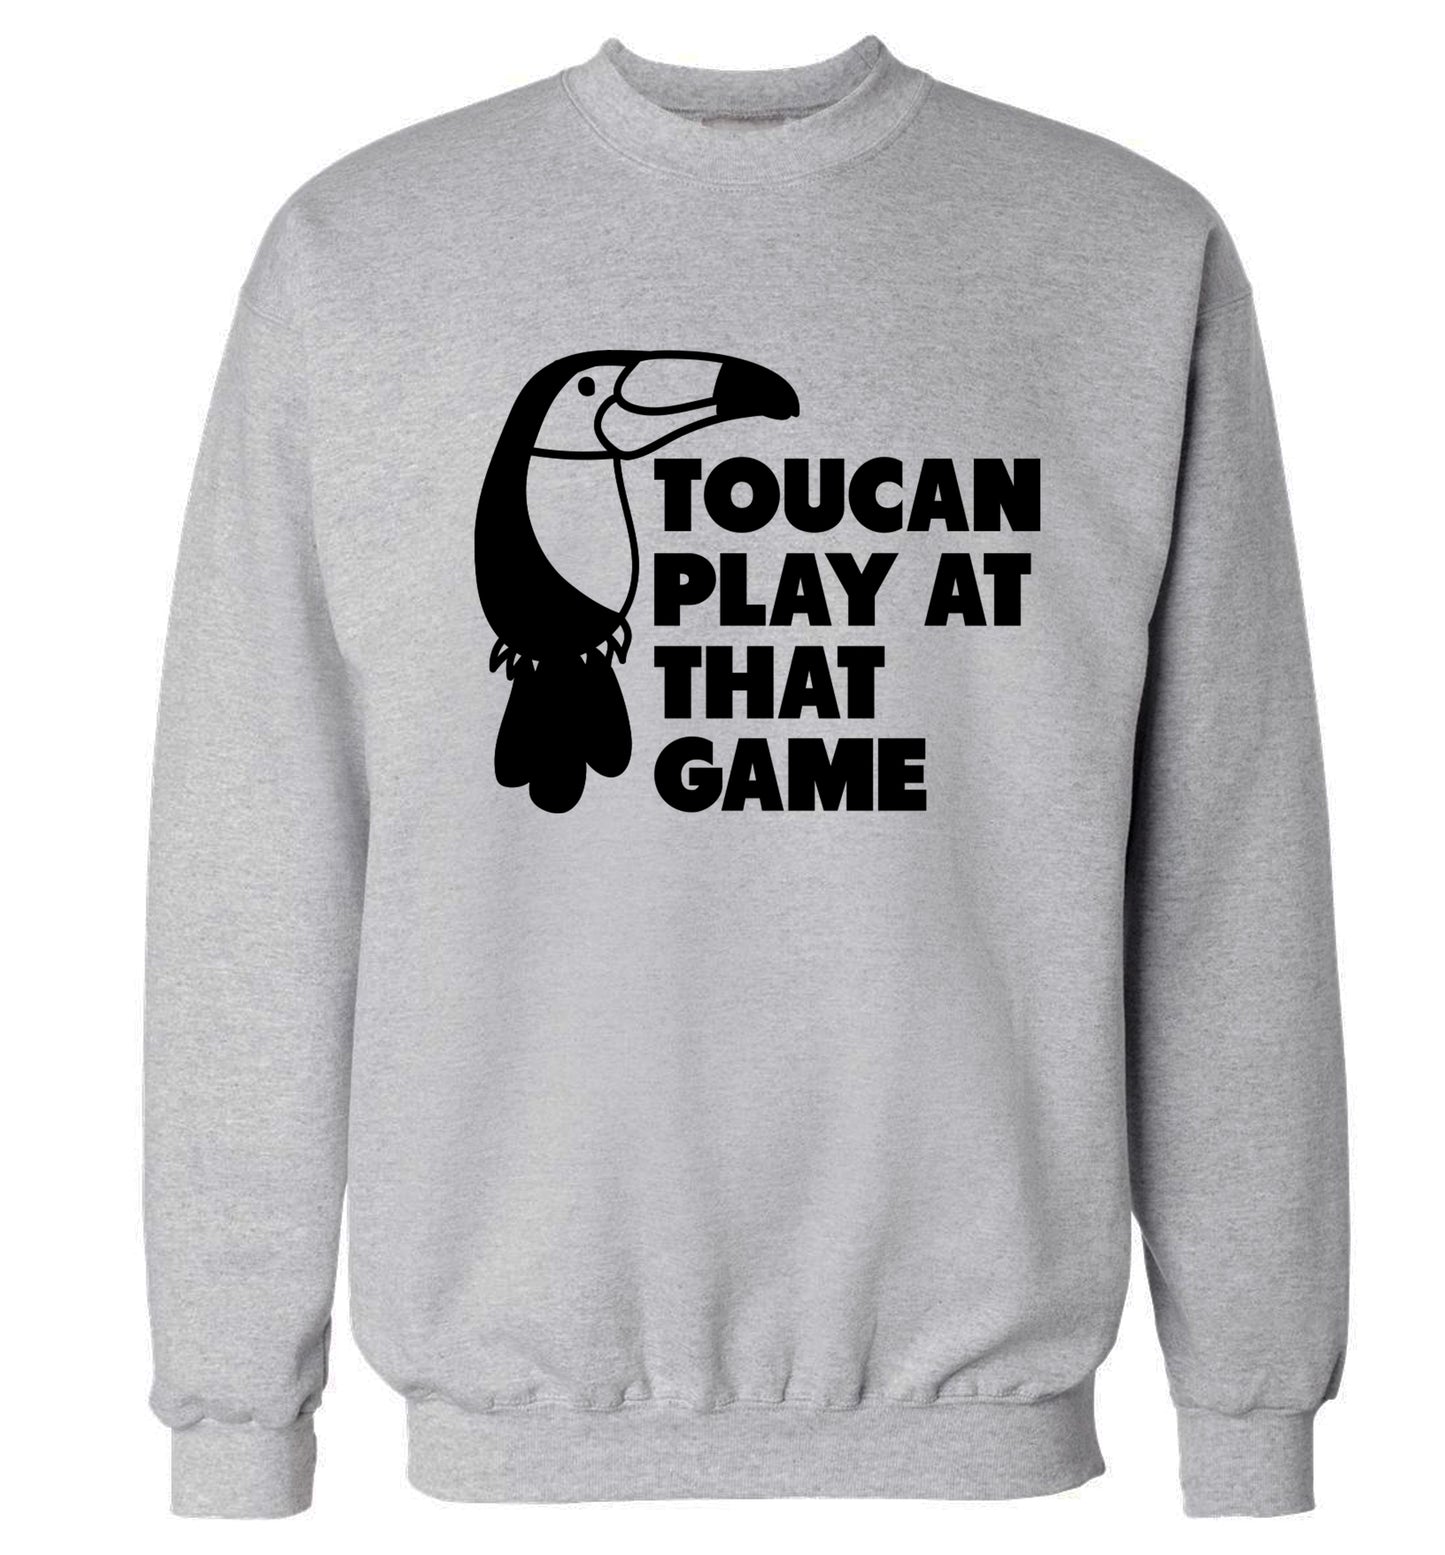 Toucan play at that game Adult's unisex grey Sweater 2XL